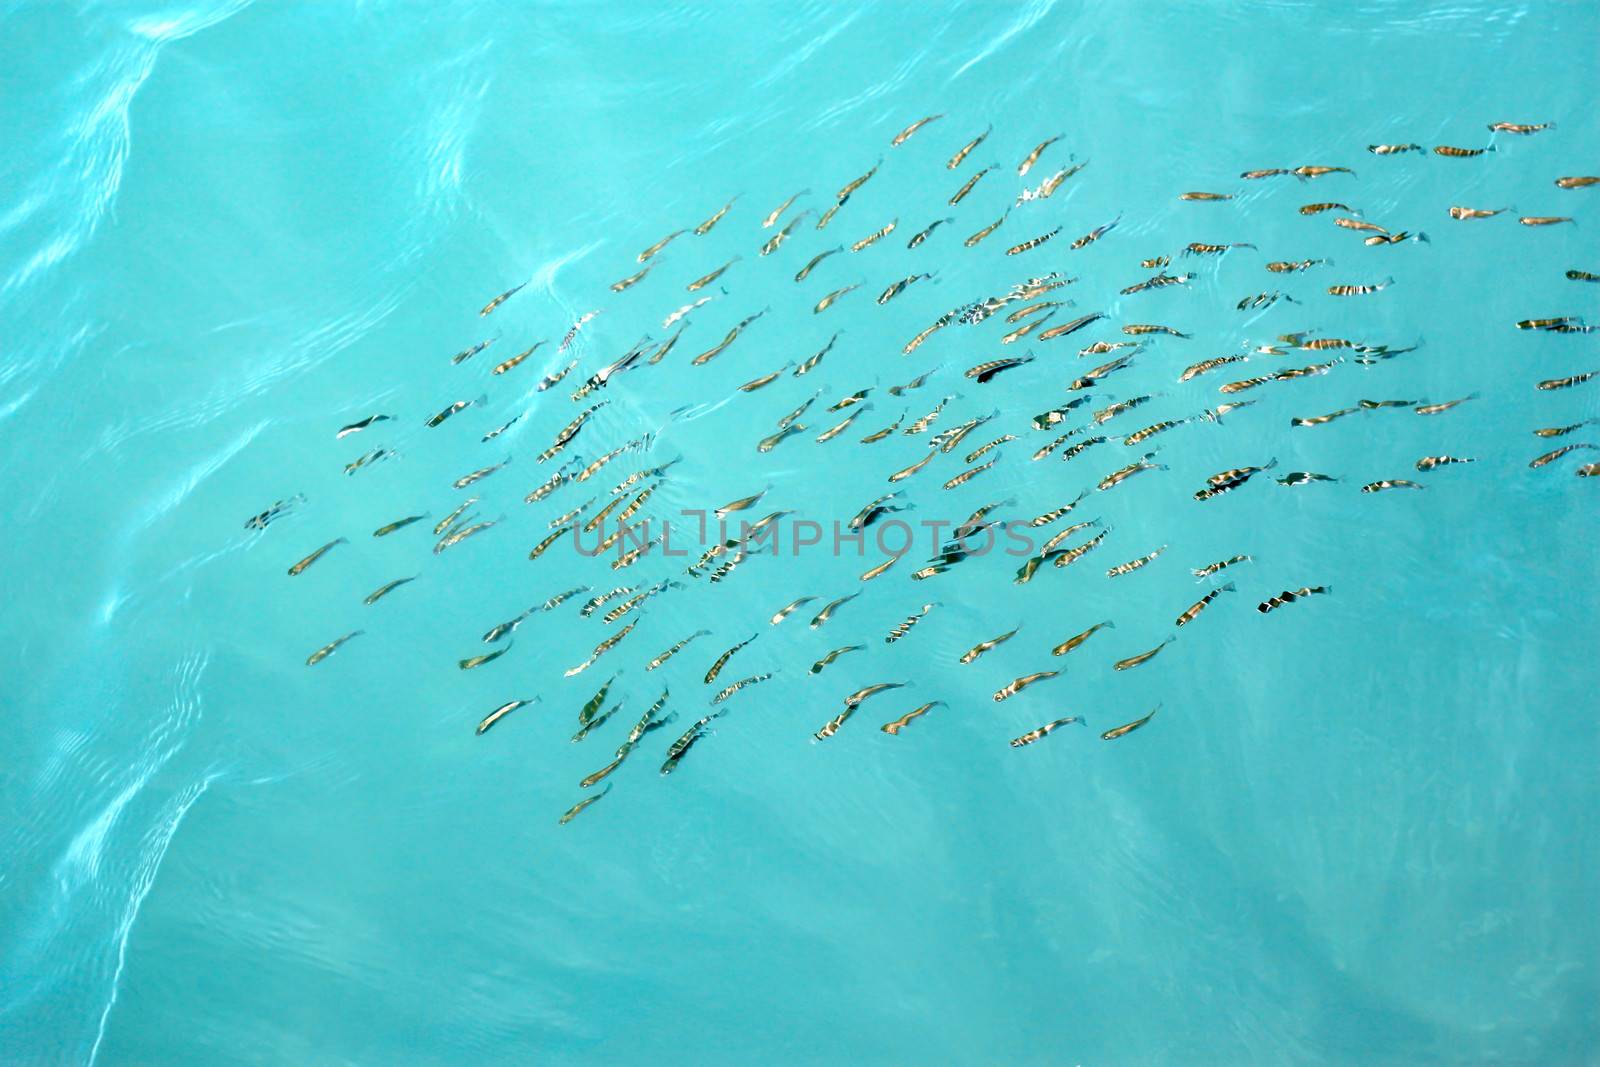 Fishes gobies near sea surface by qiiip